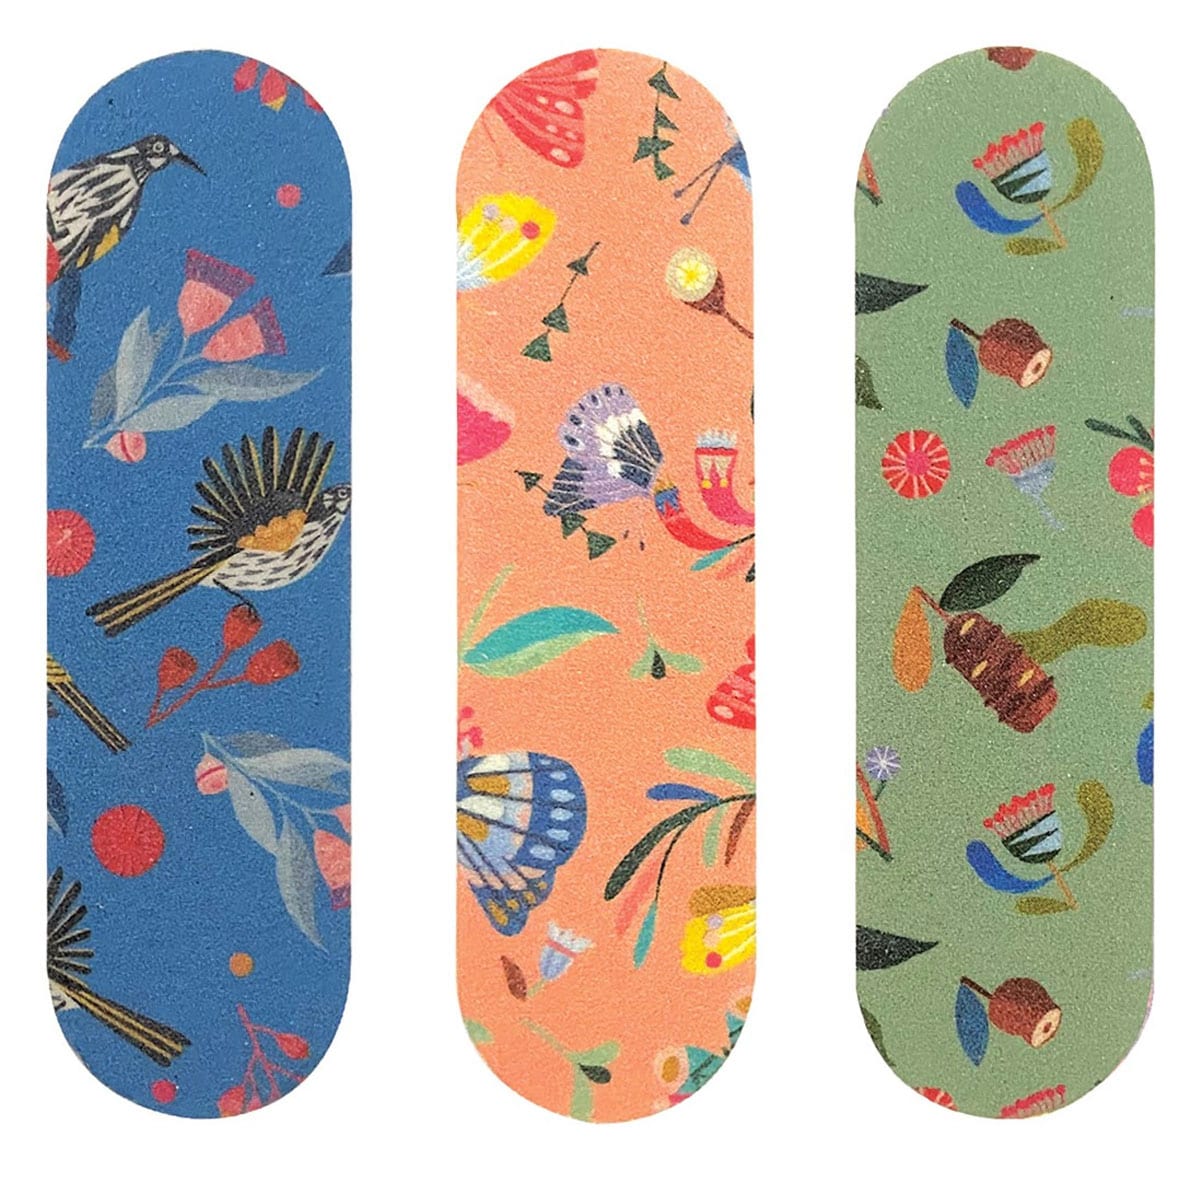 The Australian Collection Set of 6 Nail Files Andrea Smith (Colours selected at random)